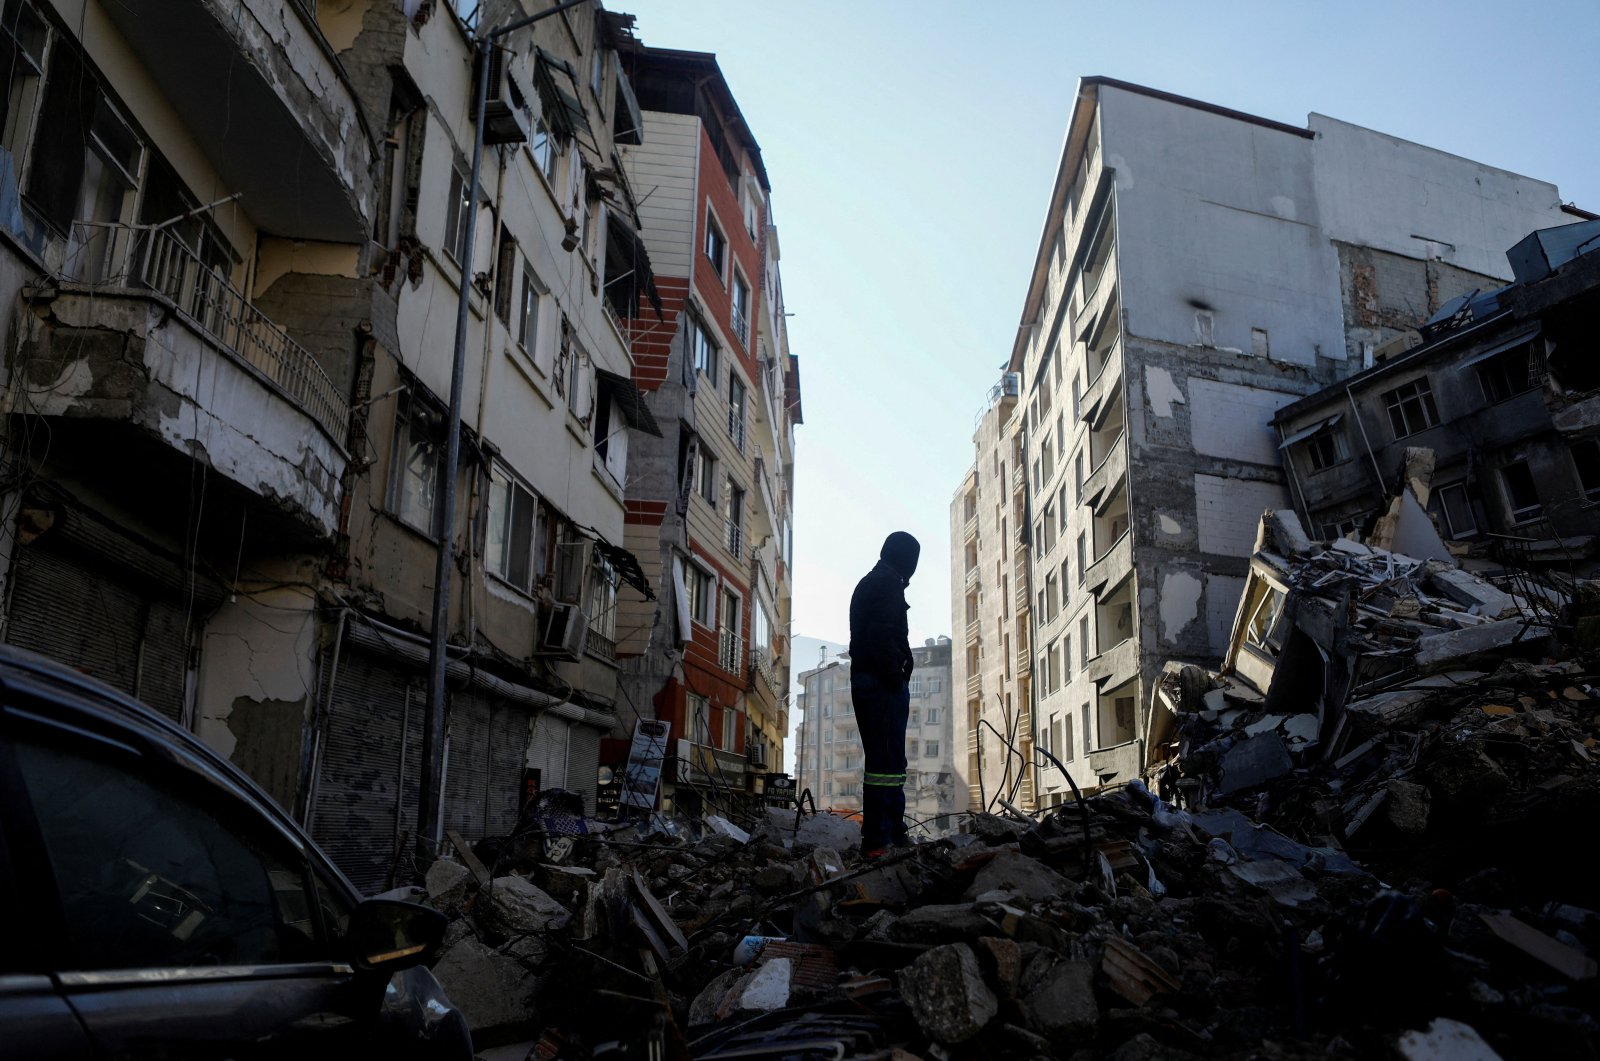 A man stands on rubble, in the aftermath of the deadly earthquake, in Hatay, Türkiye Feb. 17, 2023. (Reuters Photo)